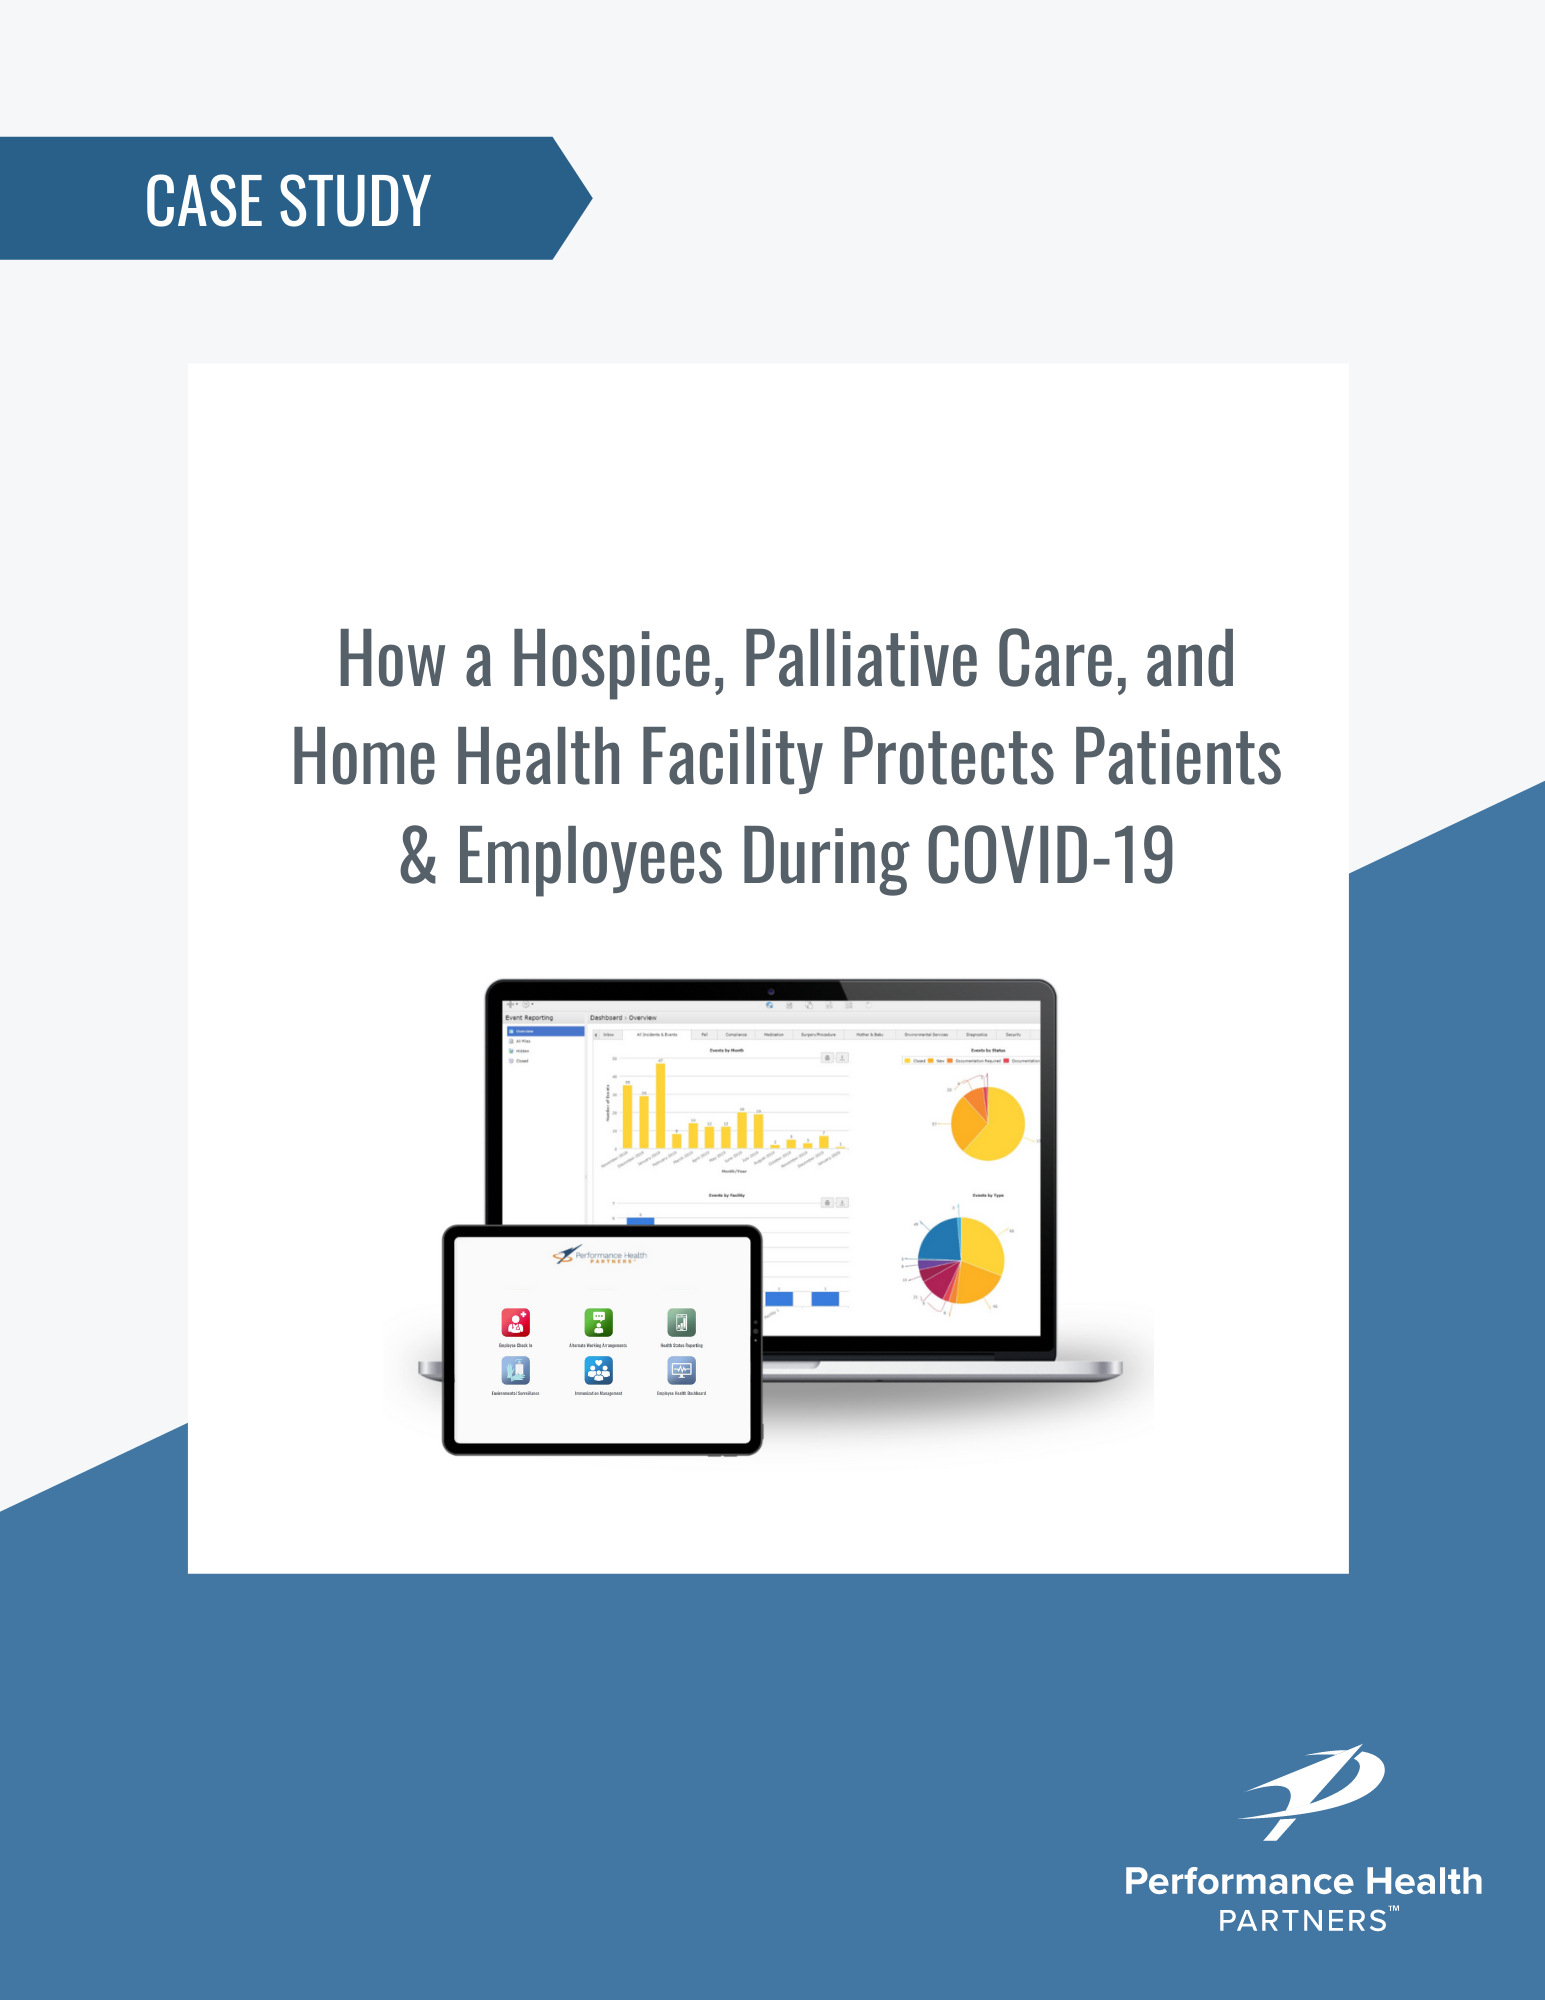 Case Study How a Hospice, Palliative Care, and Home Health Facility Protects Patients & Employees During COVID-19